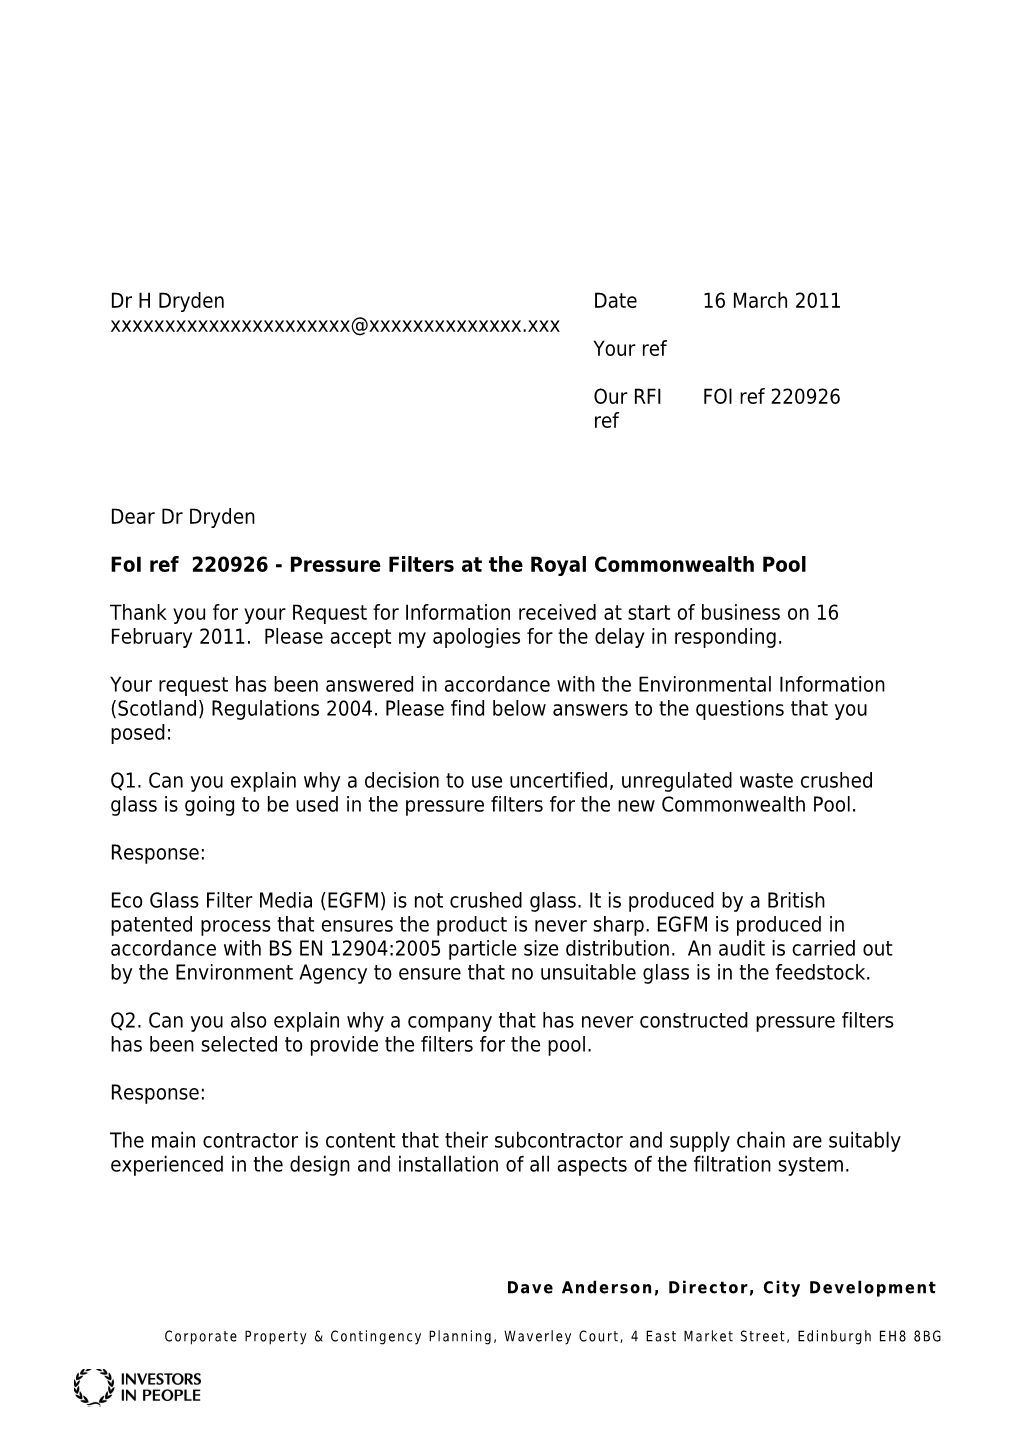 Foi Ref 220926 - Pressure Filters at the Royal Commonwealth Pool